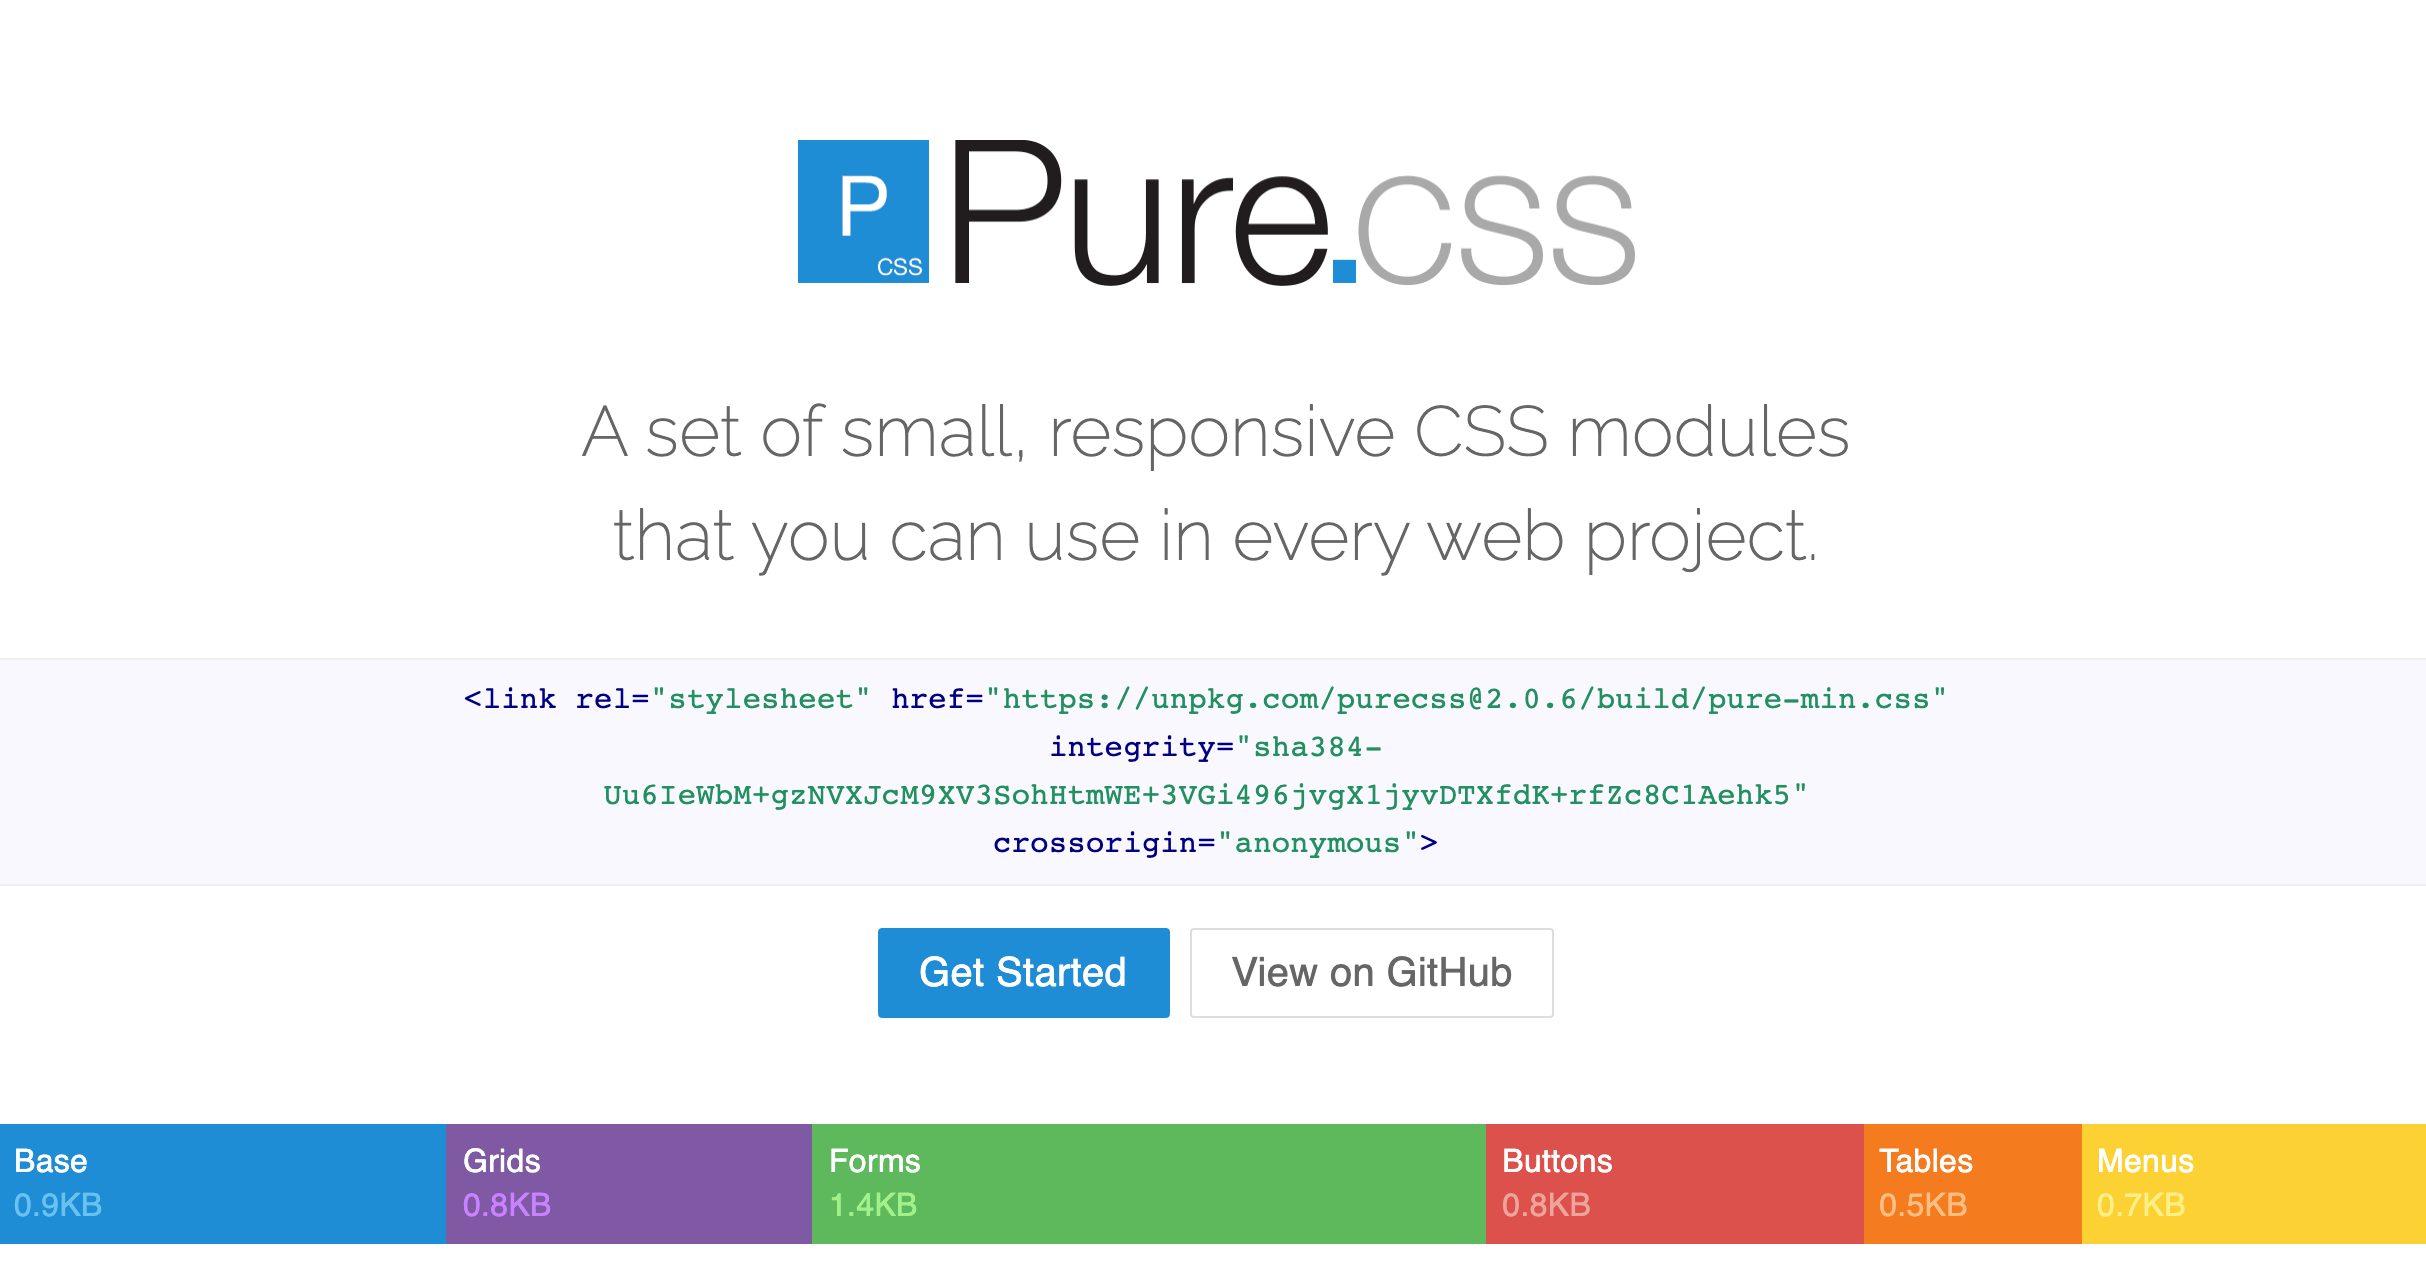 There are various CSS frameworks to choose from, including Pure.